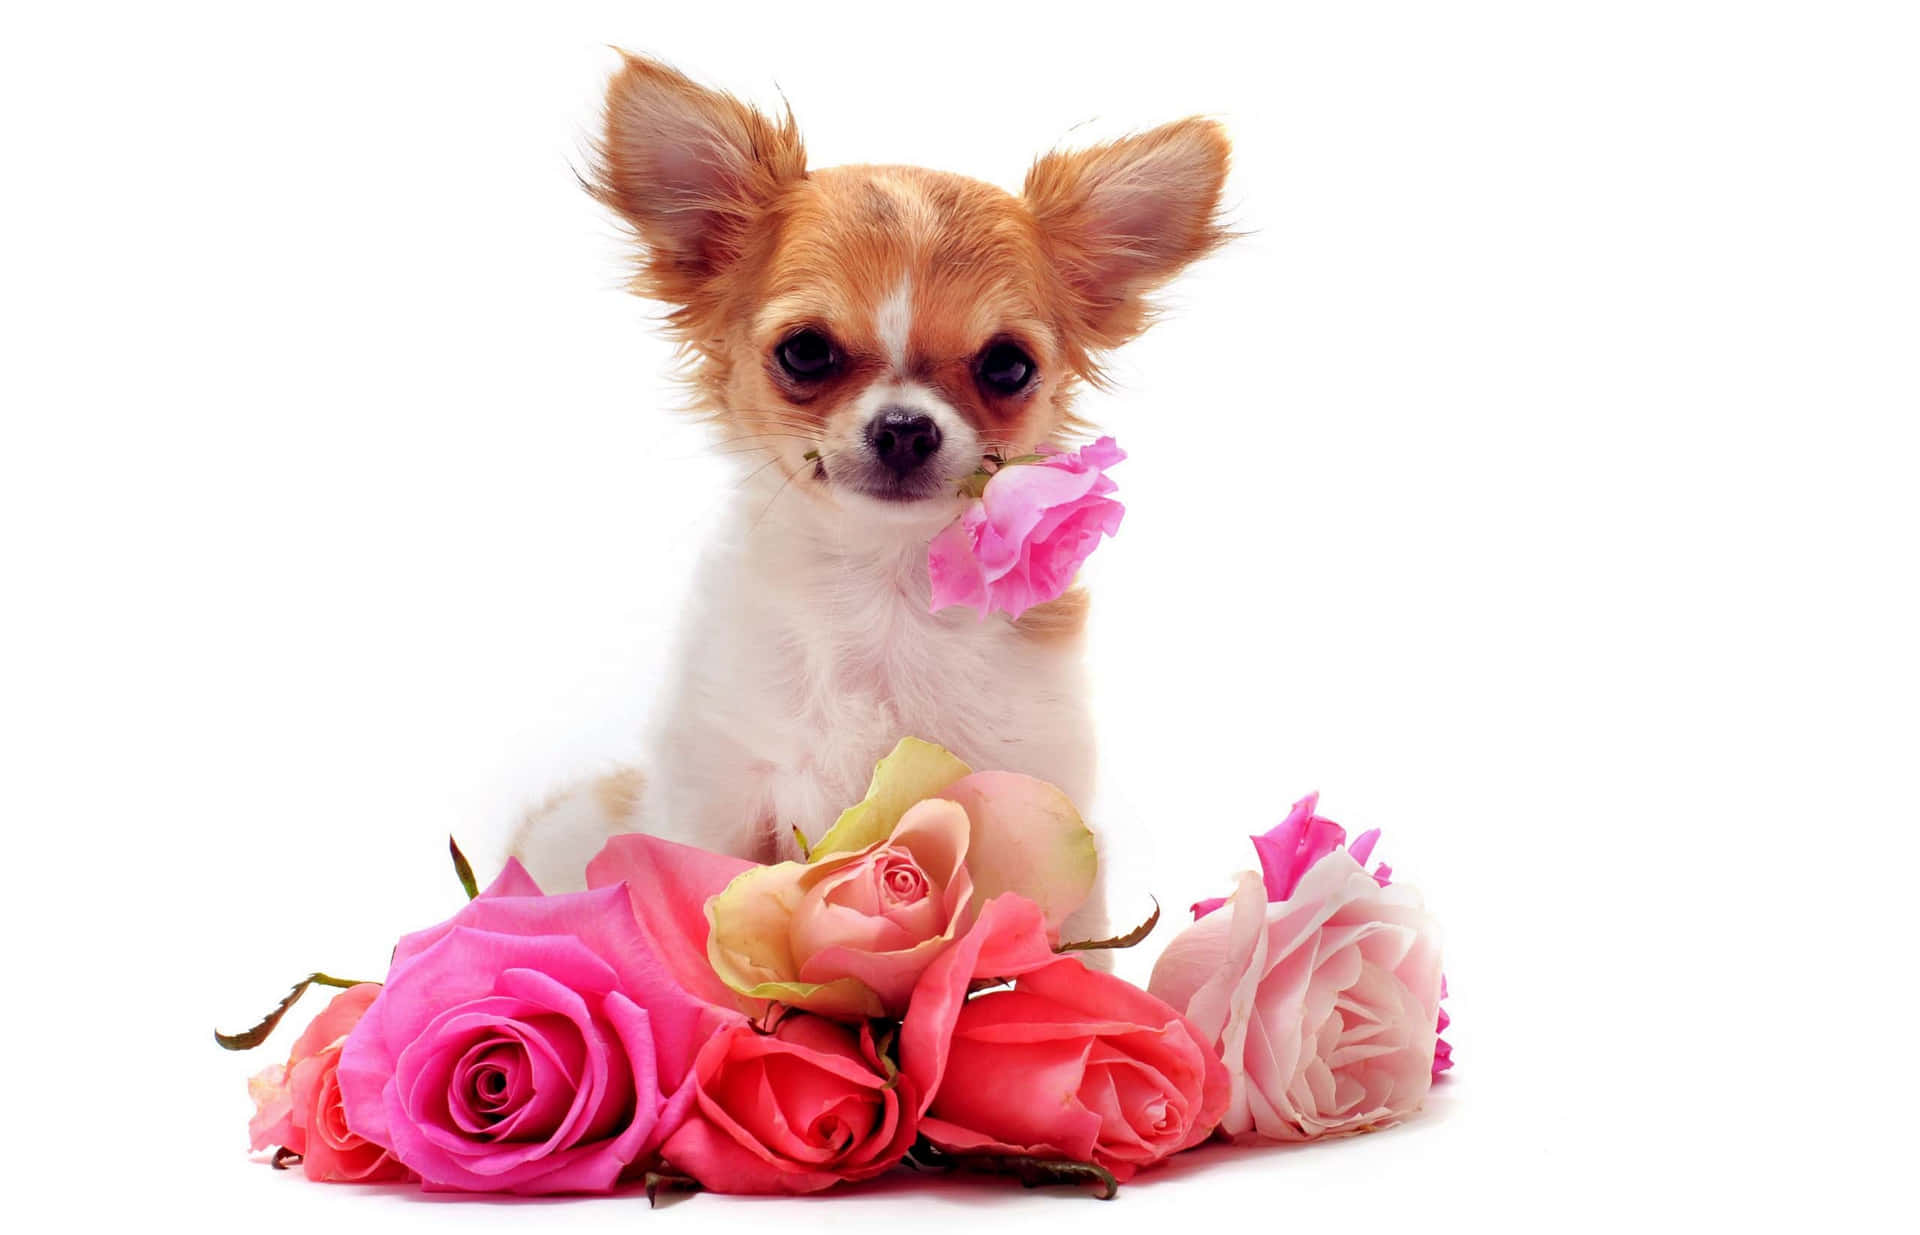 Lovely Chihuahua Dog With Roses Wallpaper